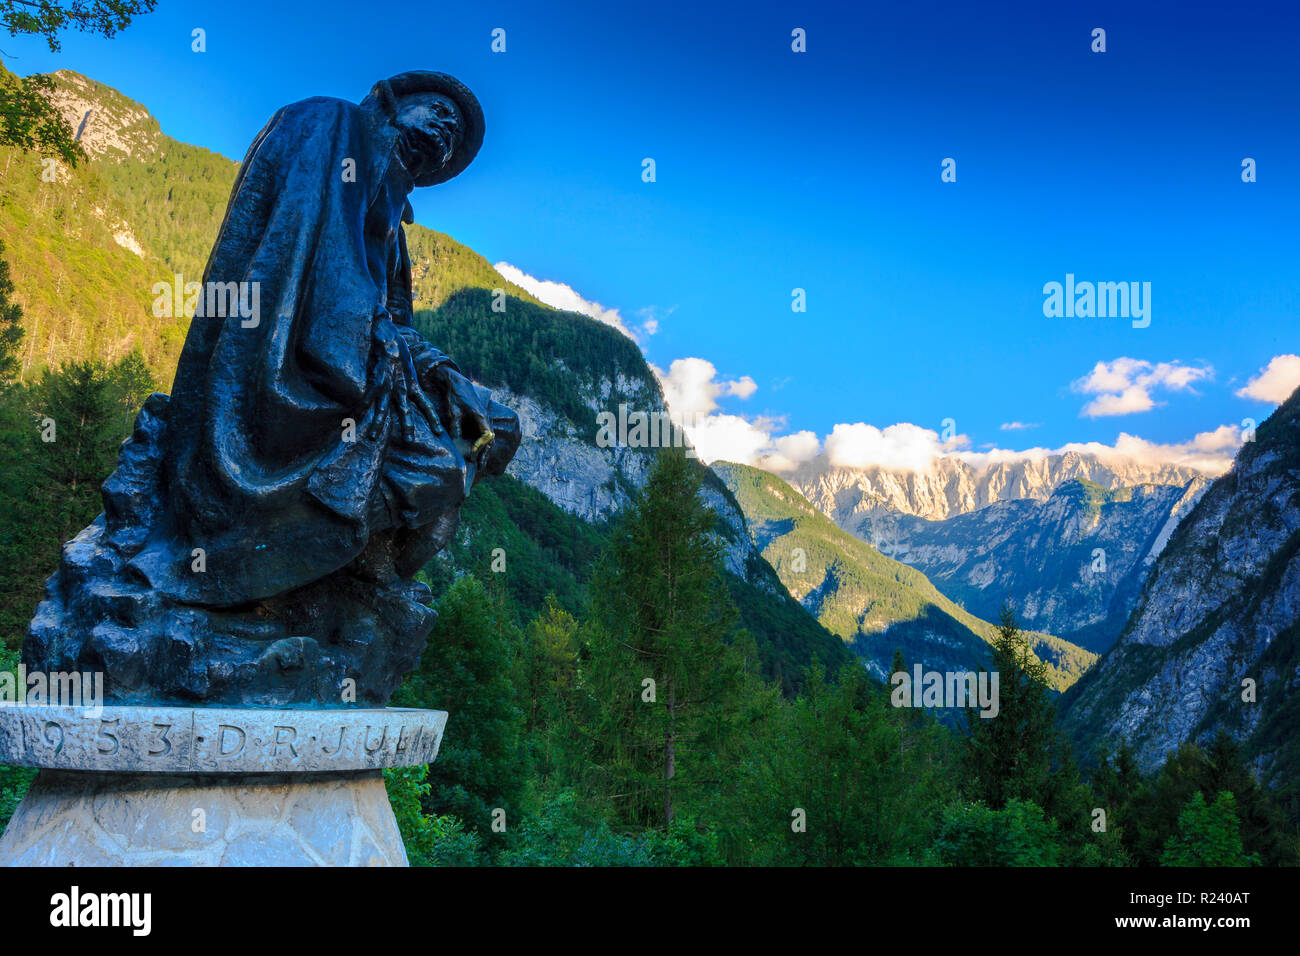 Monument and mountain landscape. Stock Photo